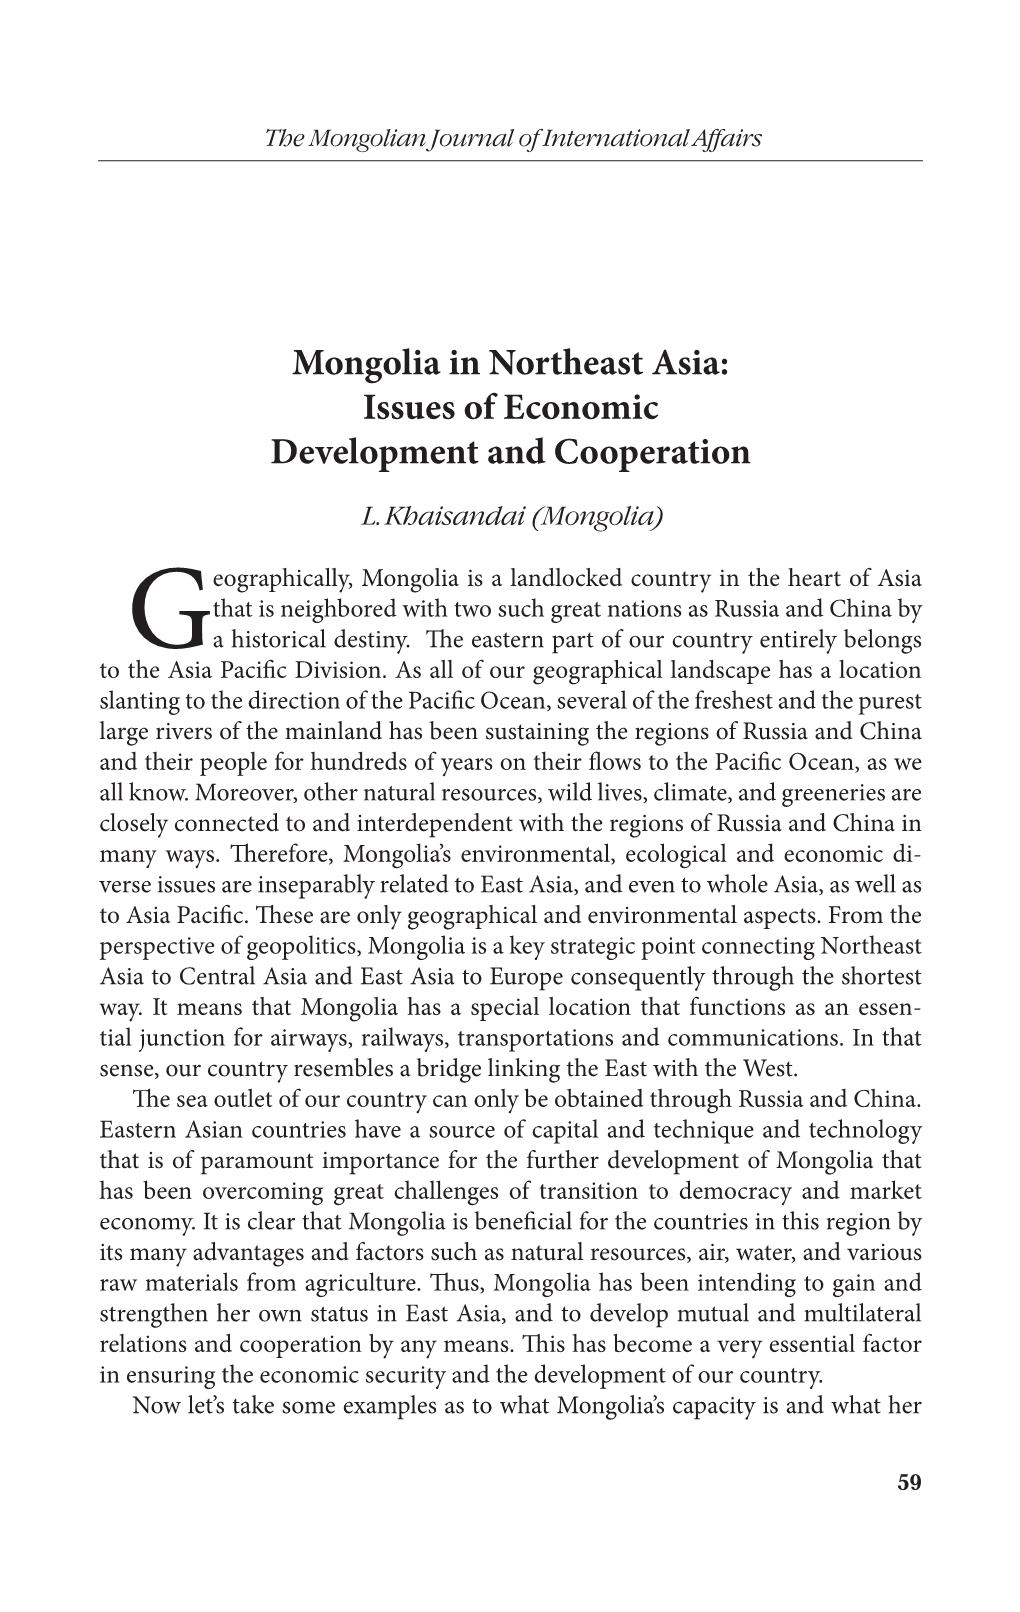 Mongolia in Northeast Asia: Issues of Economic Development and Cooperation